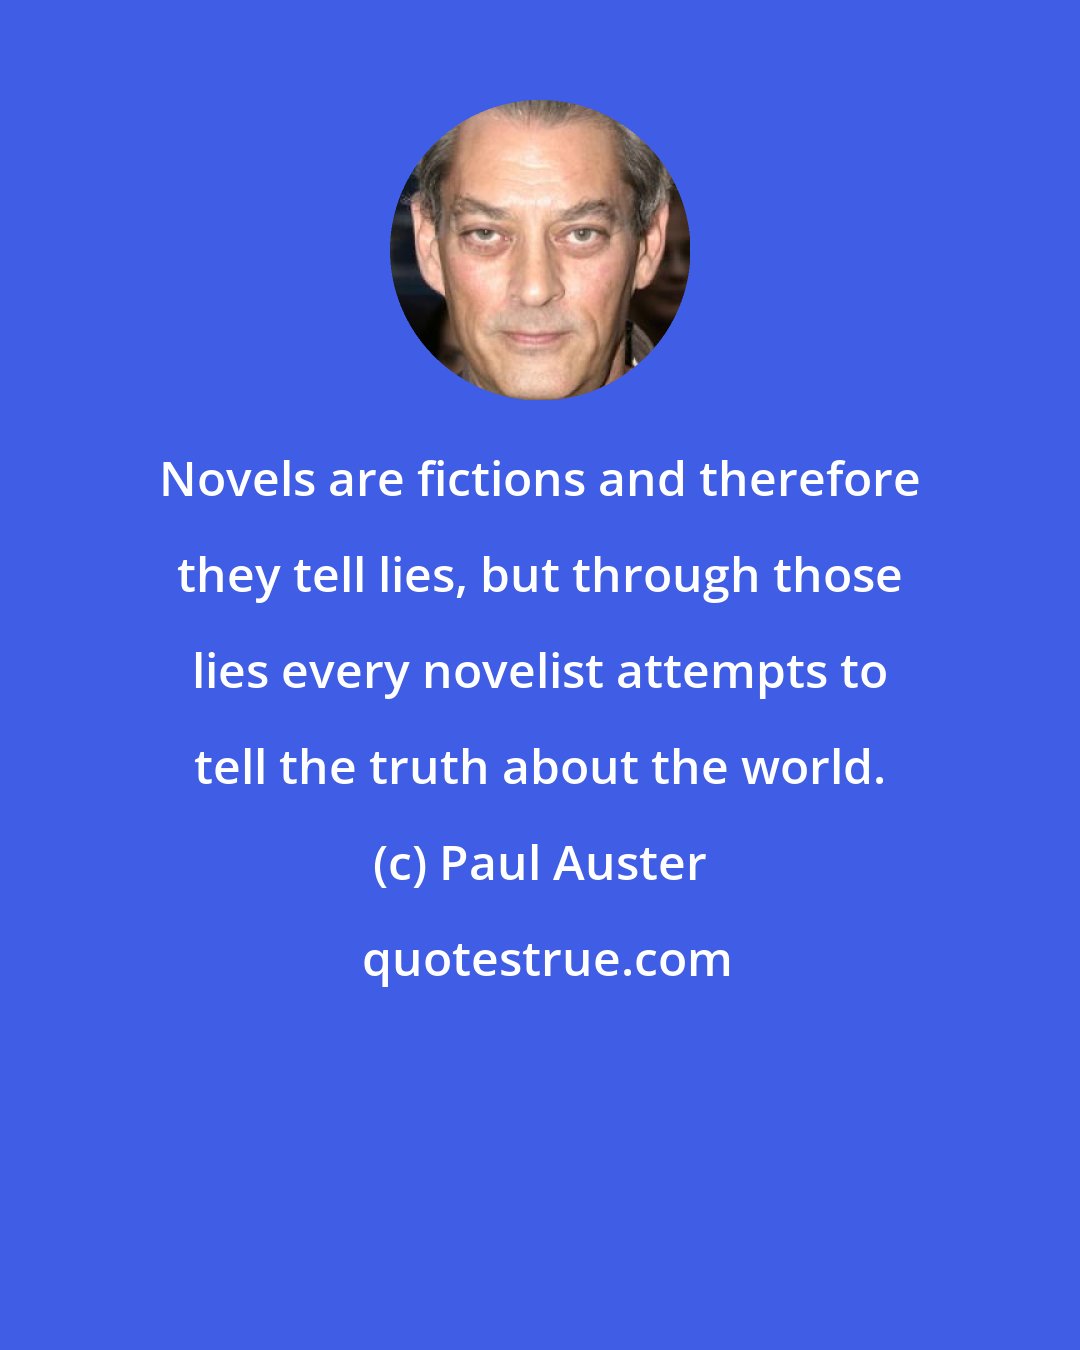 Paul Auster: Novels are fictions and therefore they tell lies, but through those lies every novelist attempts to tell the truth about the world.